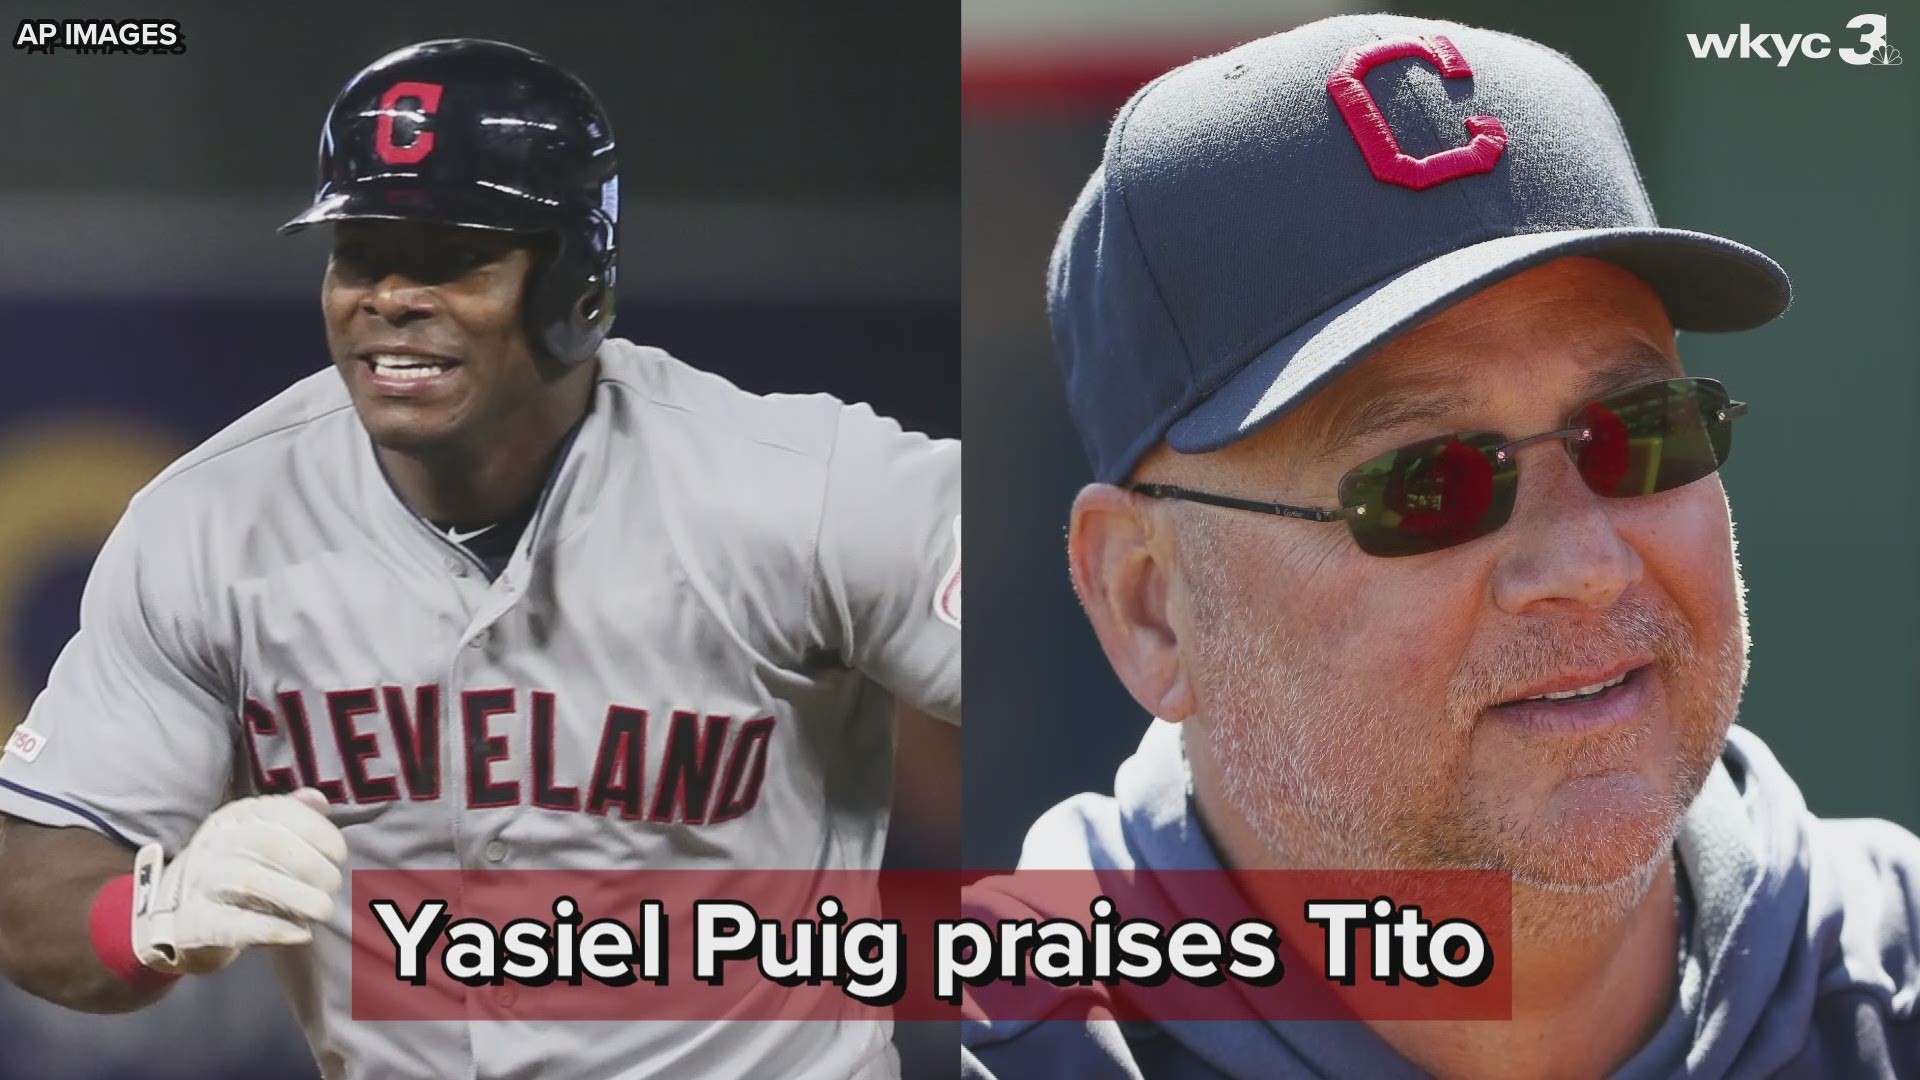 Speaking to the MLB Network, Yasiel Puig said that Cleveland Indians manager Terry Francona is the best manager he's ever played for.